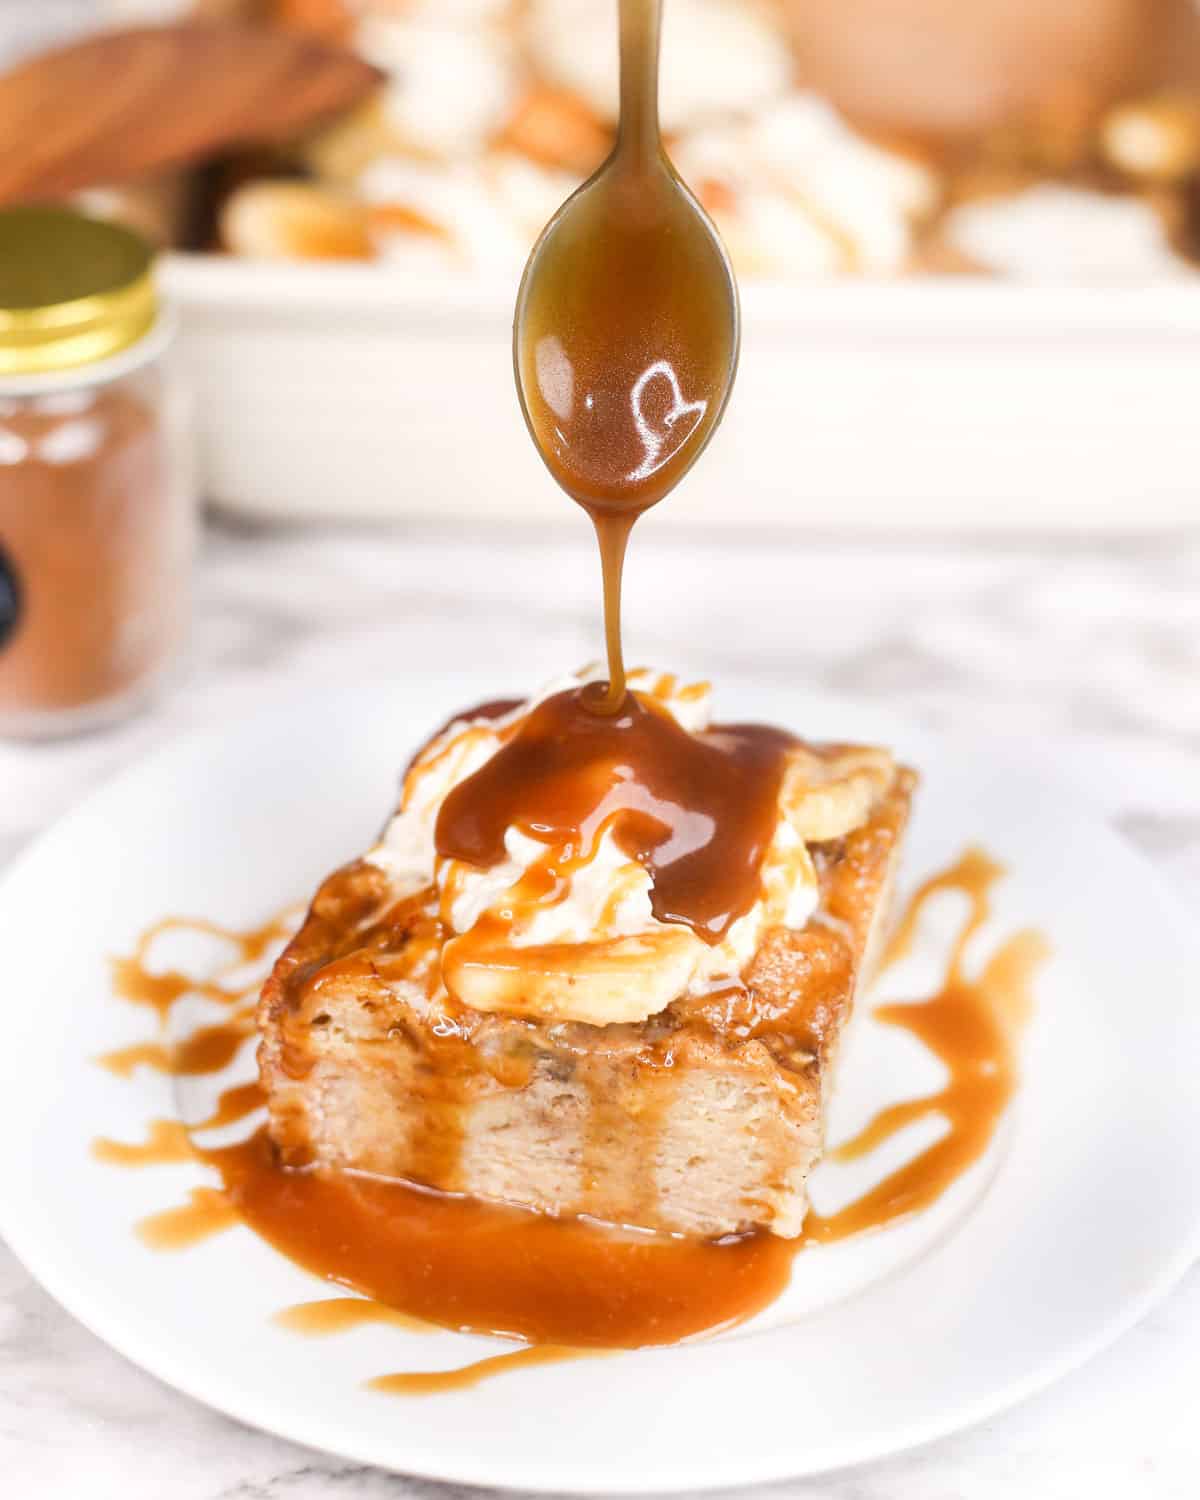 a spoon drizzling caramel sauce over a plate of banana bread pudding